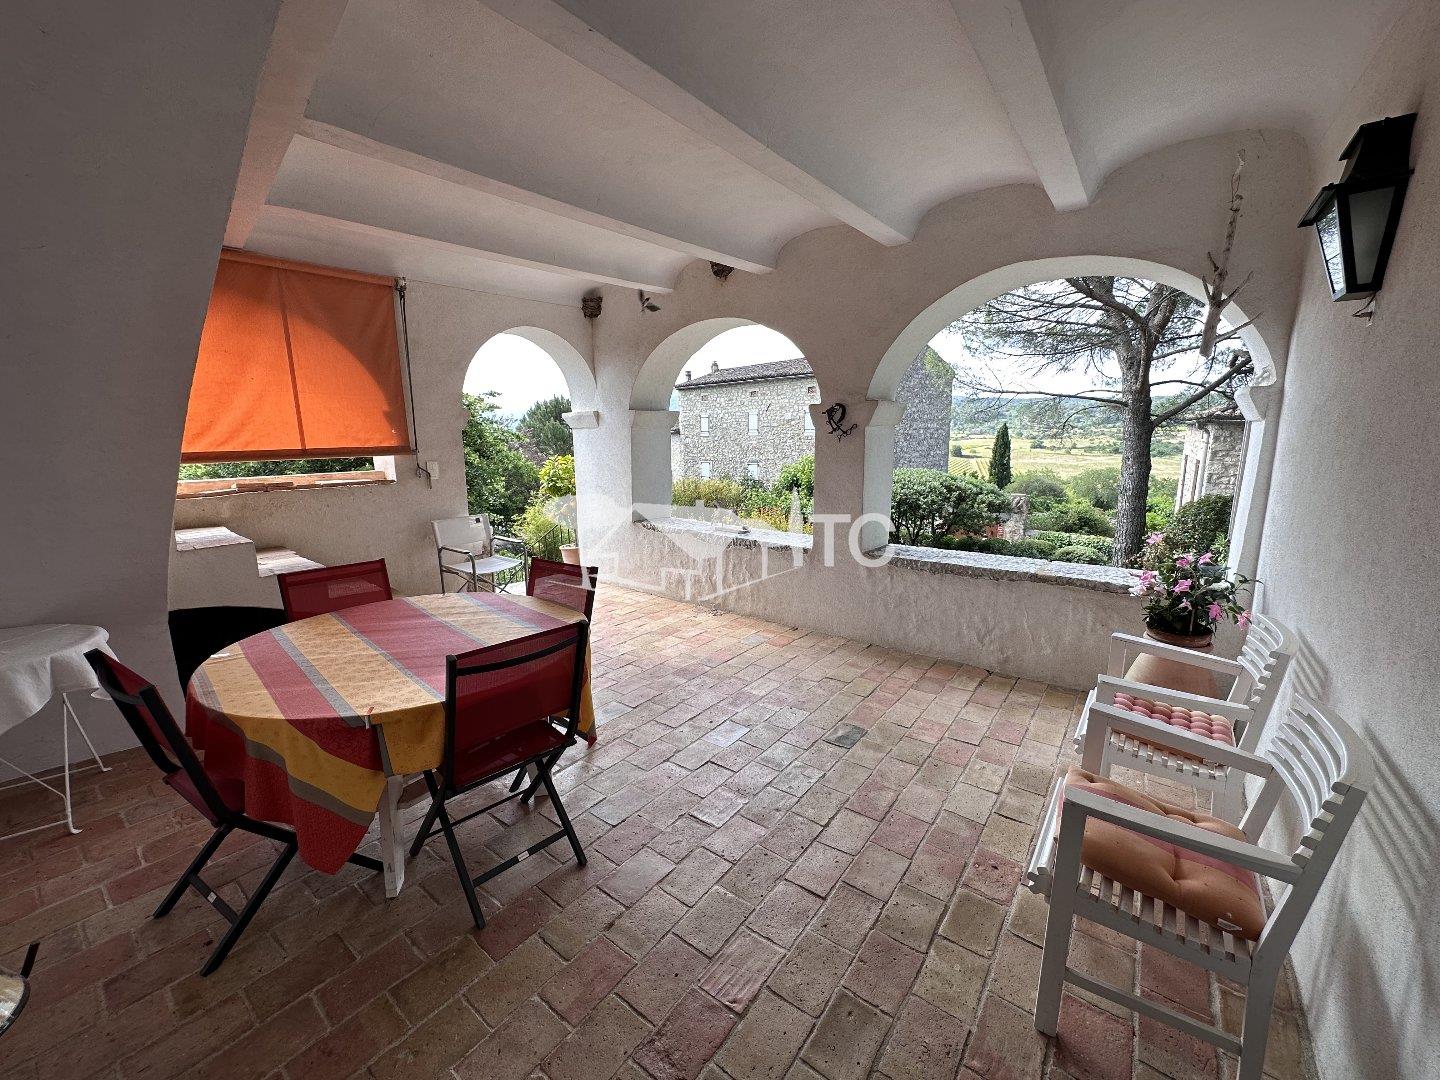 Charming 18th-century property, 270m² living space